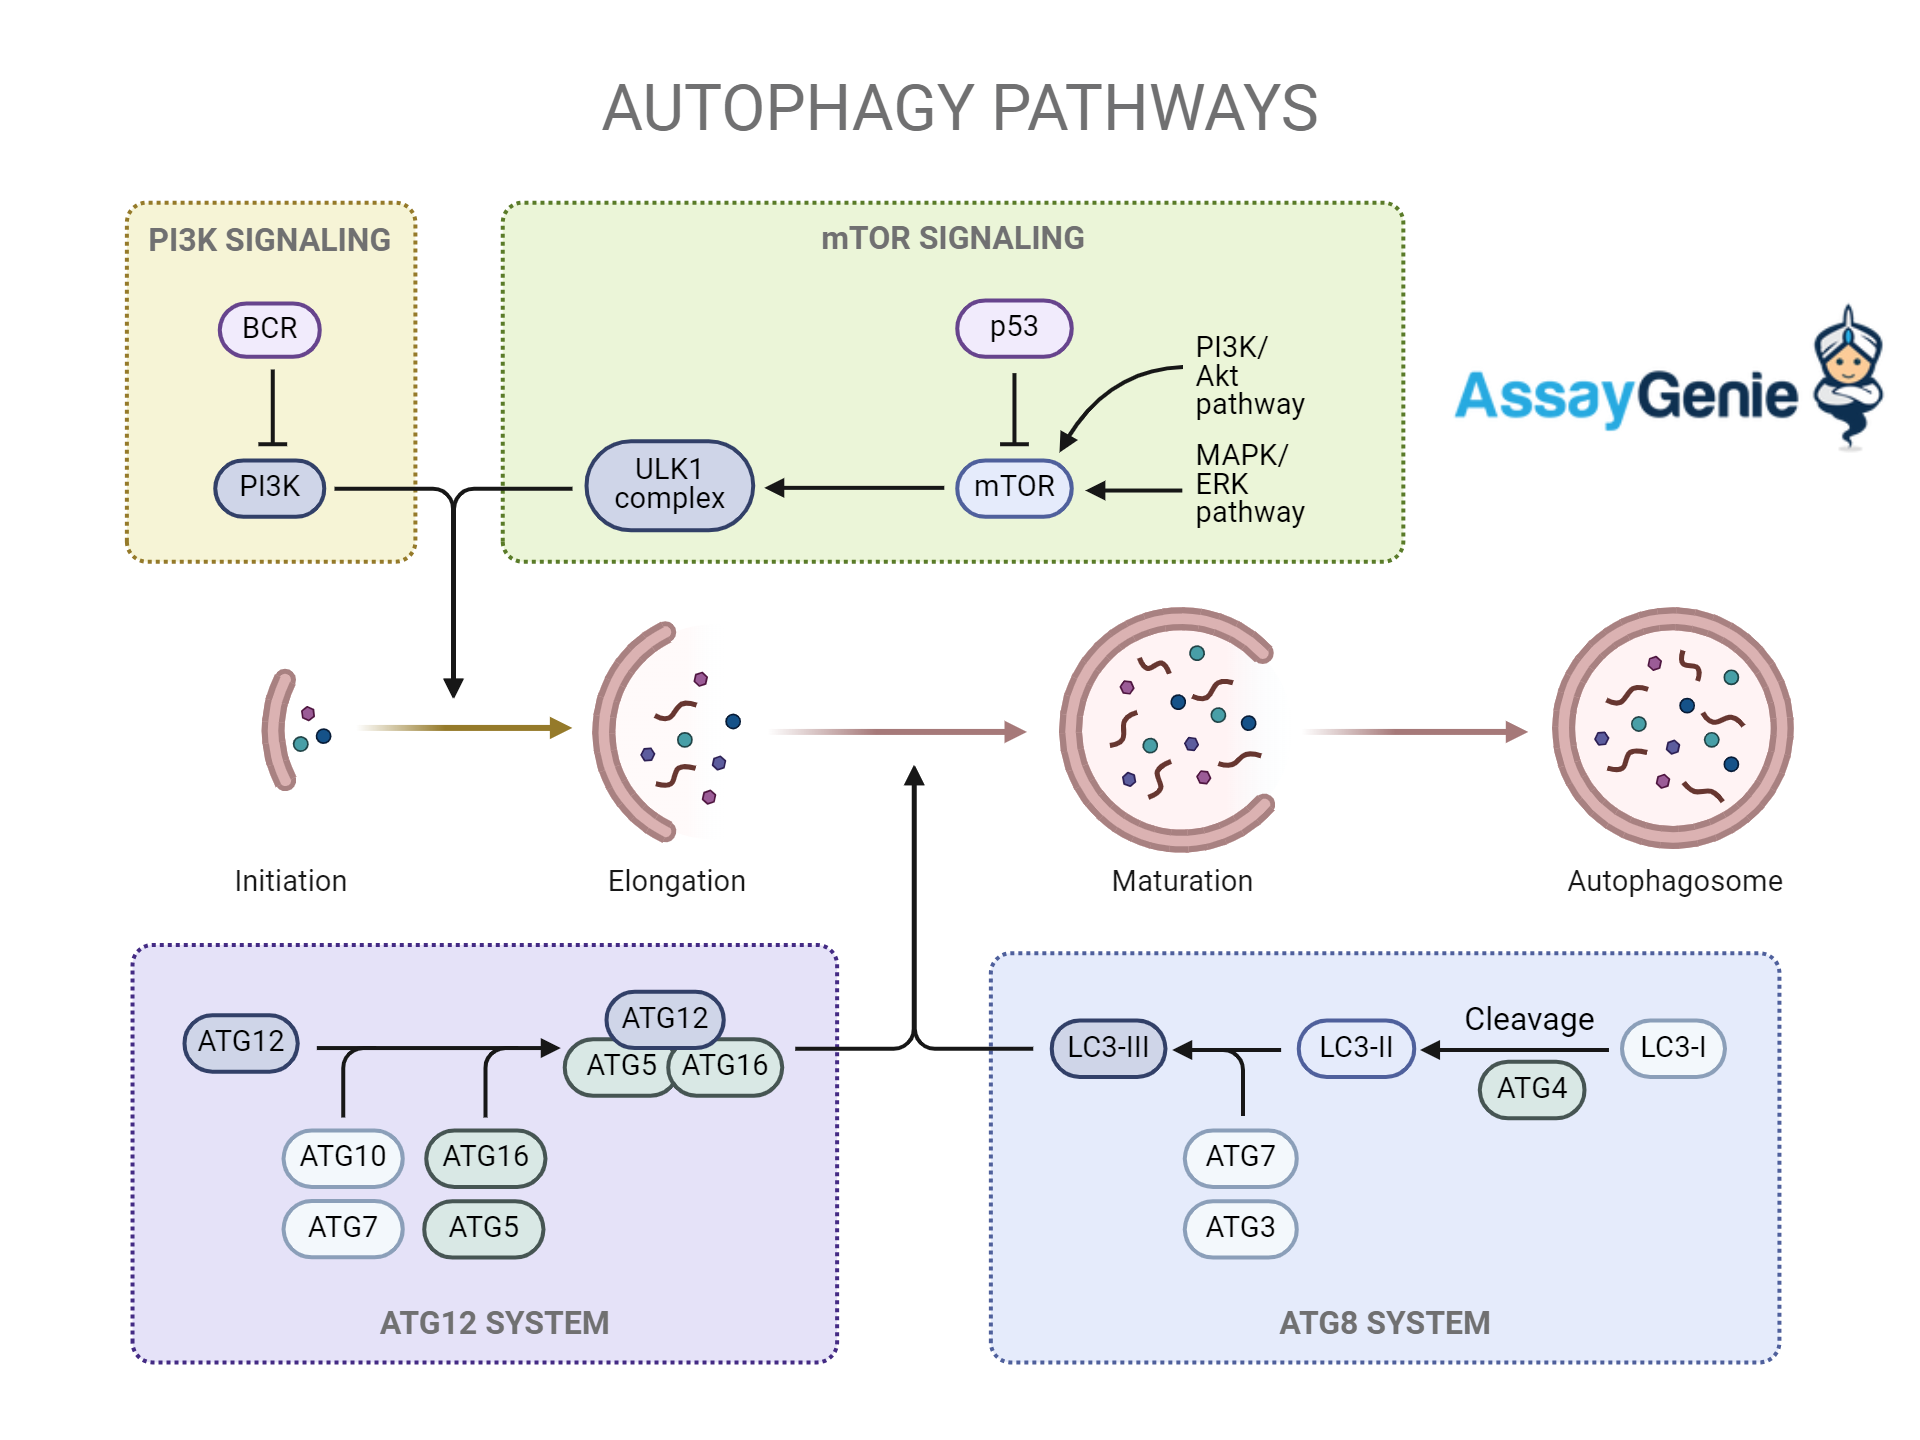 An overview of autophagy pathway